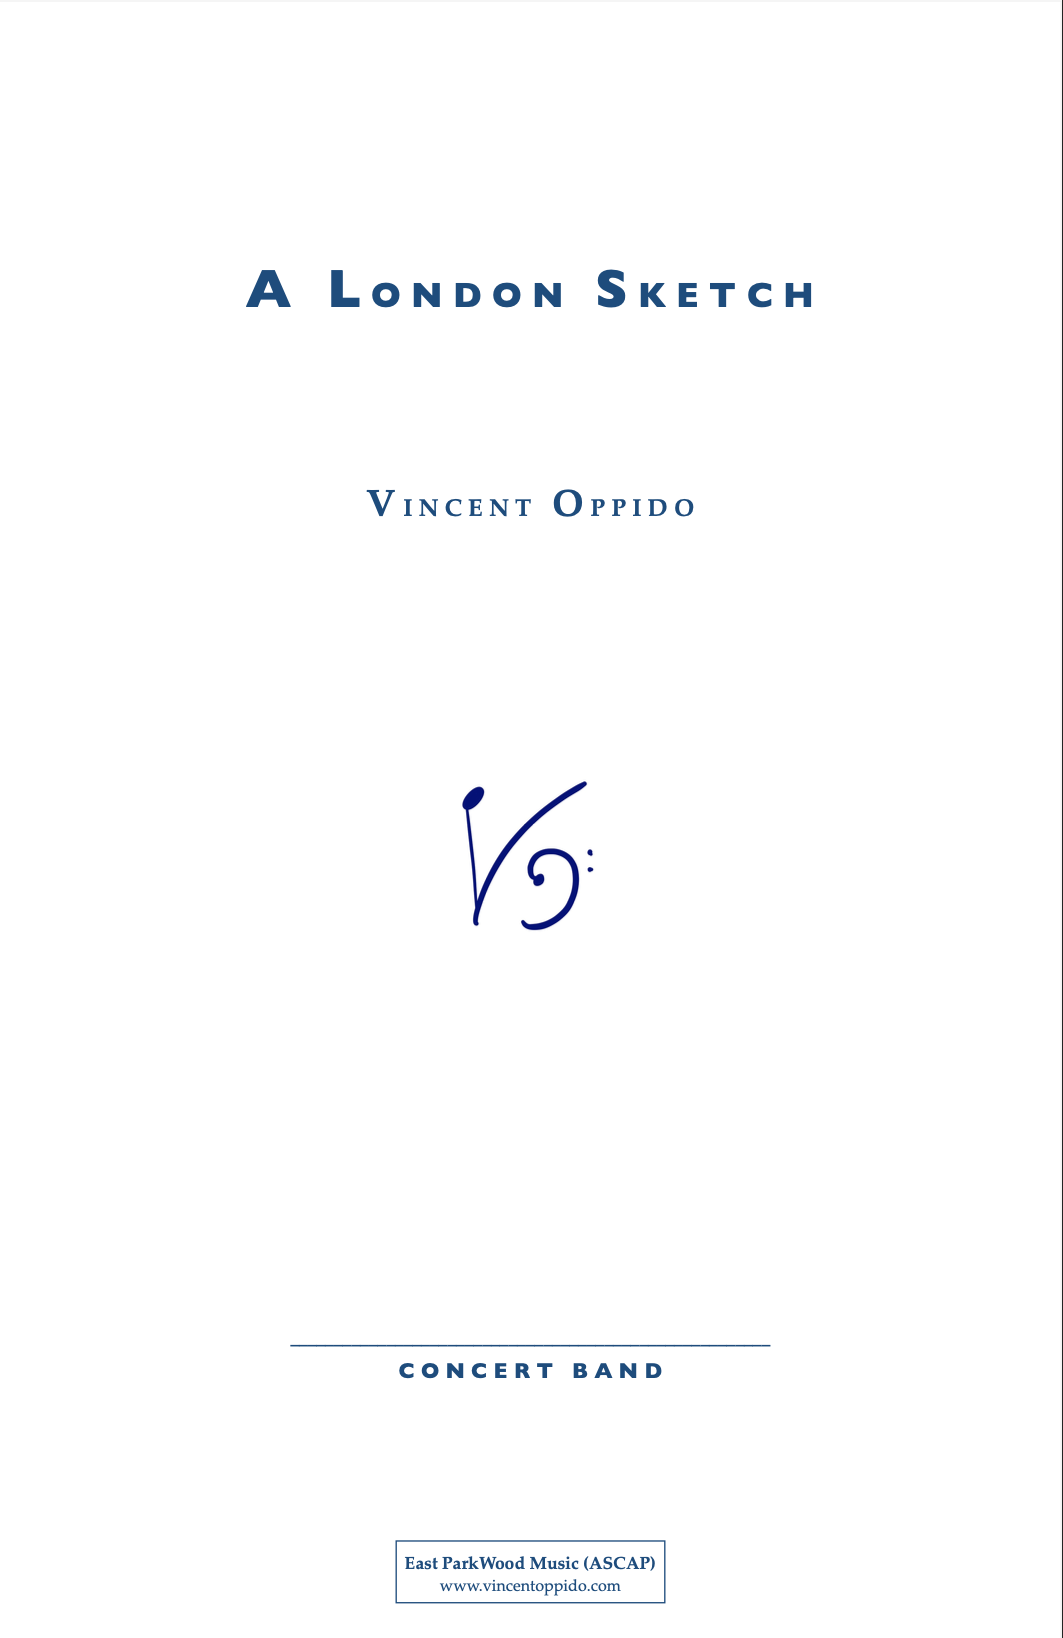 A London Sketch (Band Version) by Vincent Oppido